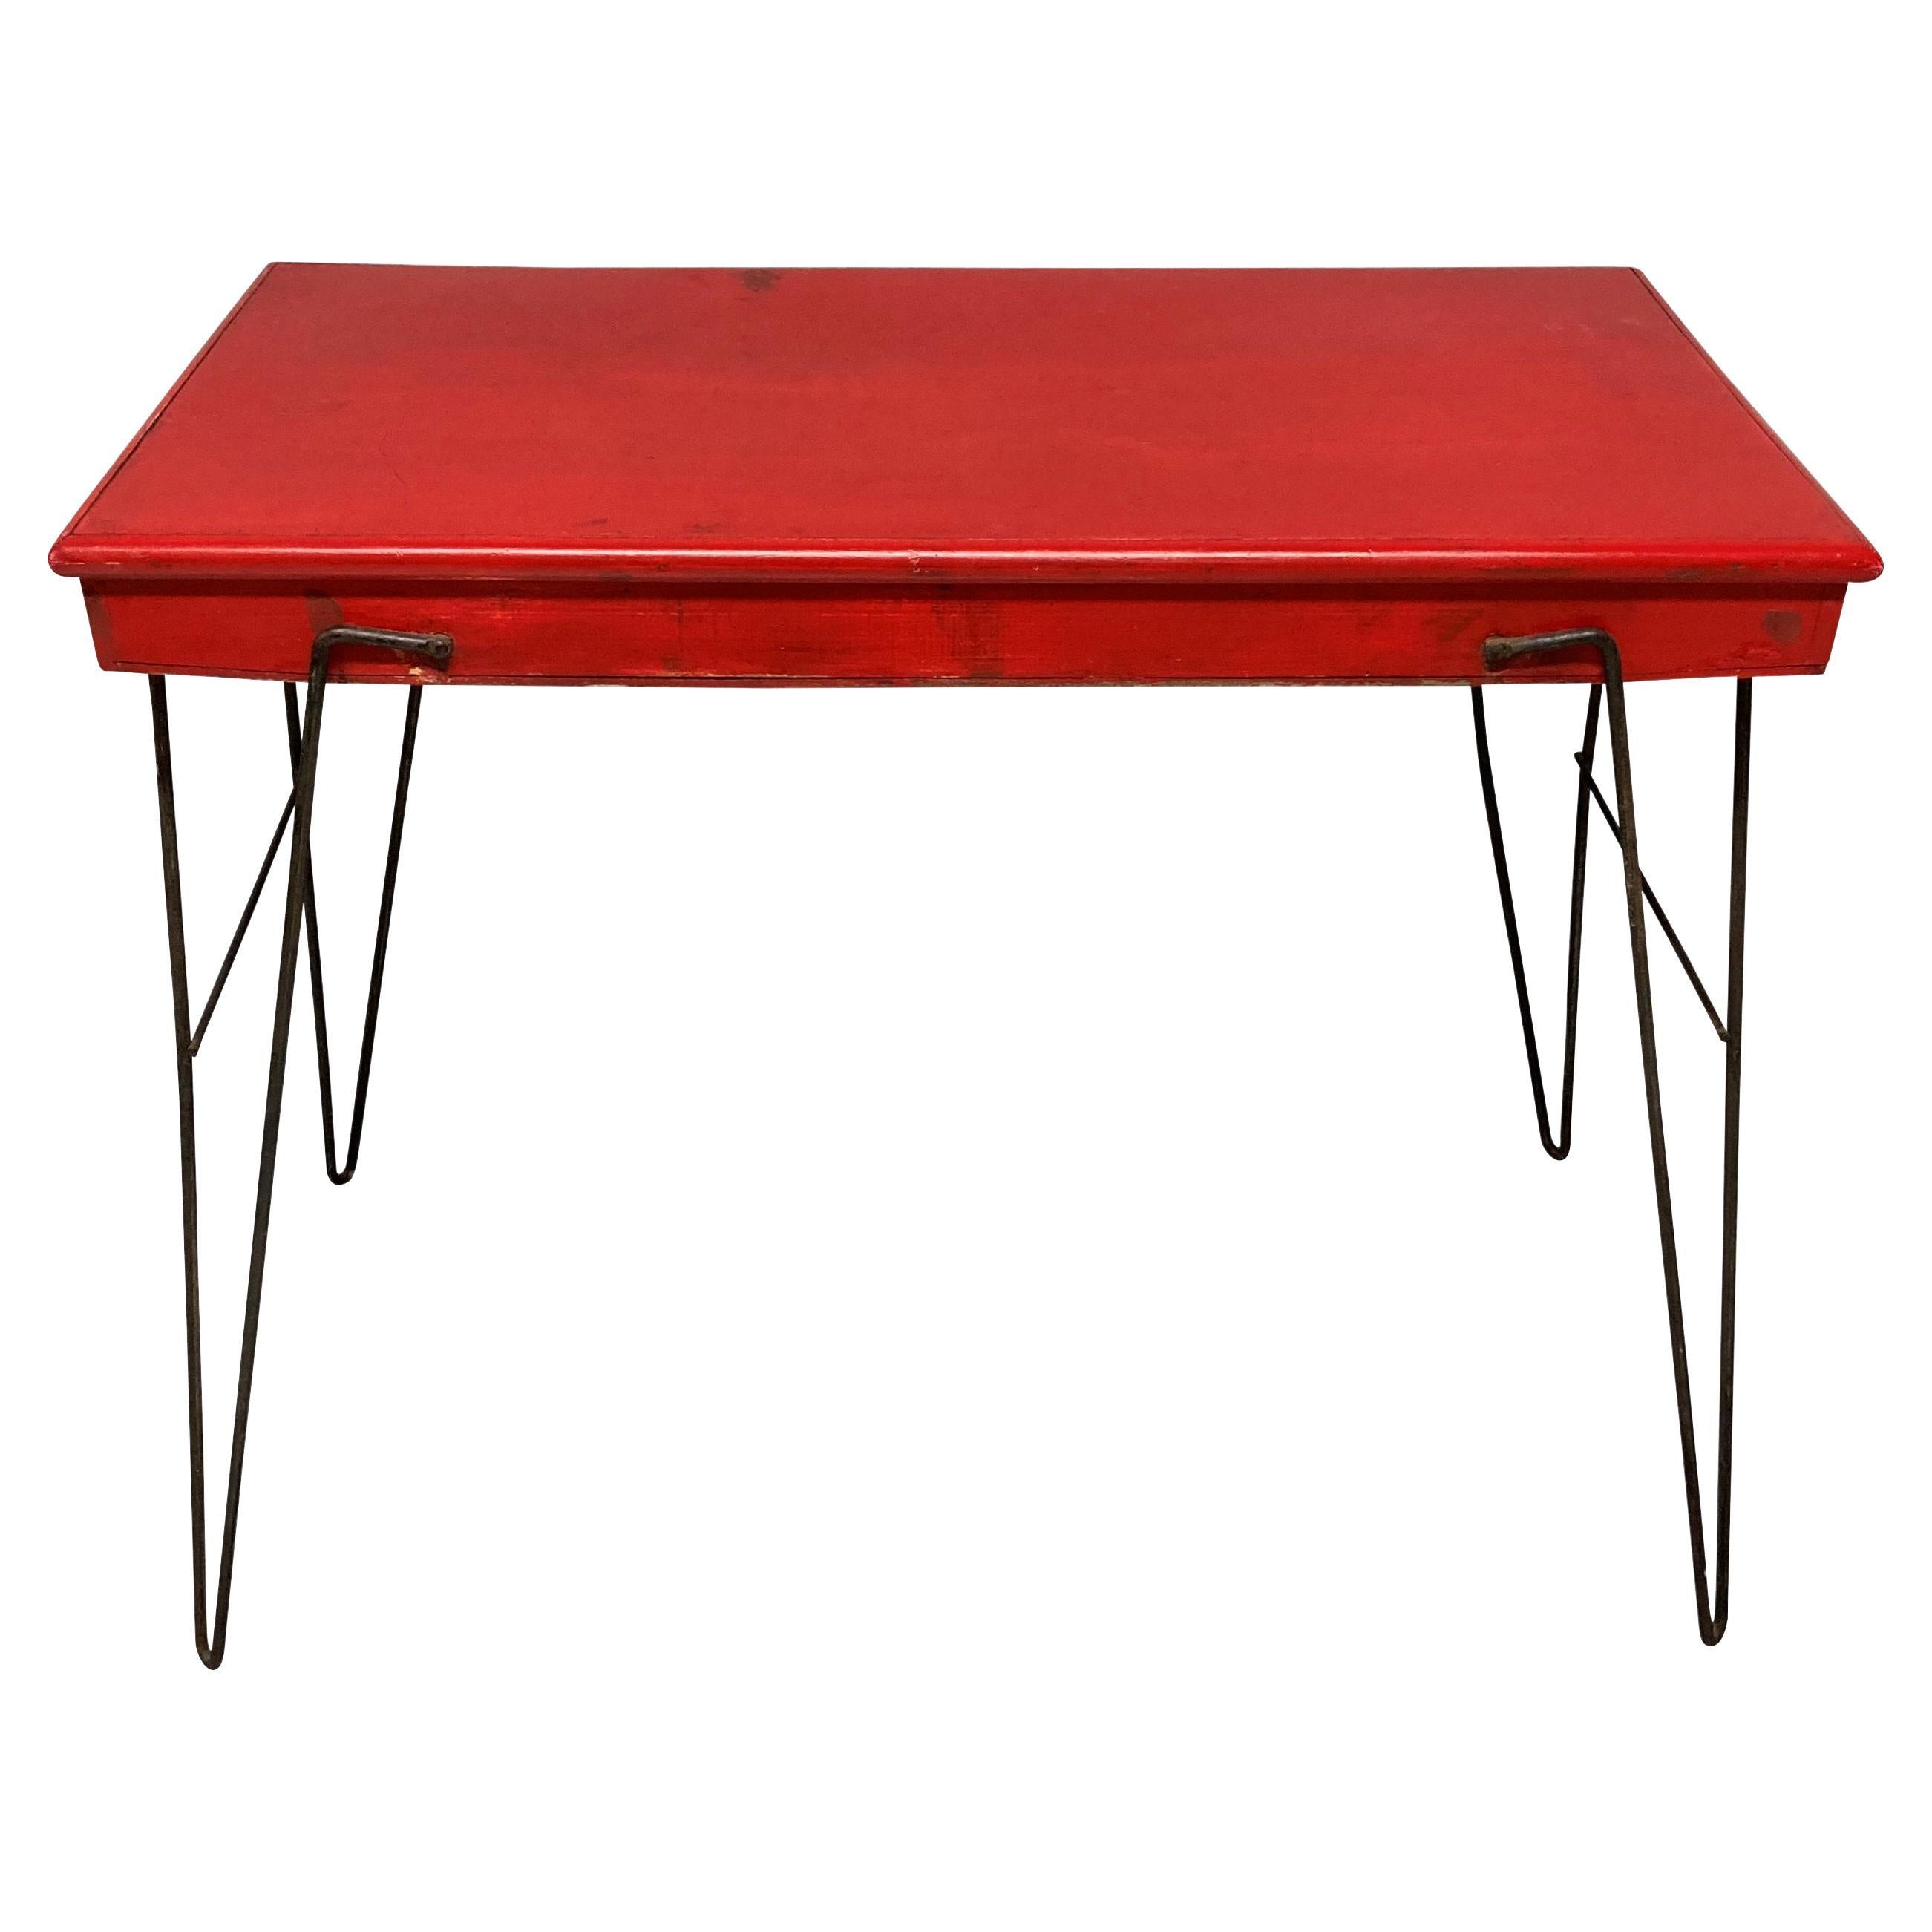 Scarlet Midcentury Folding Table For Sale